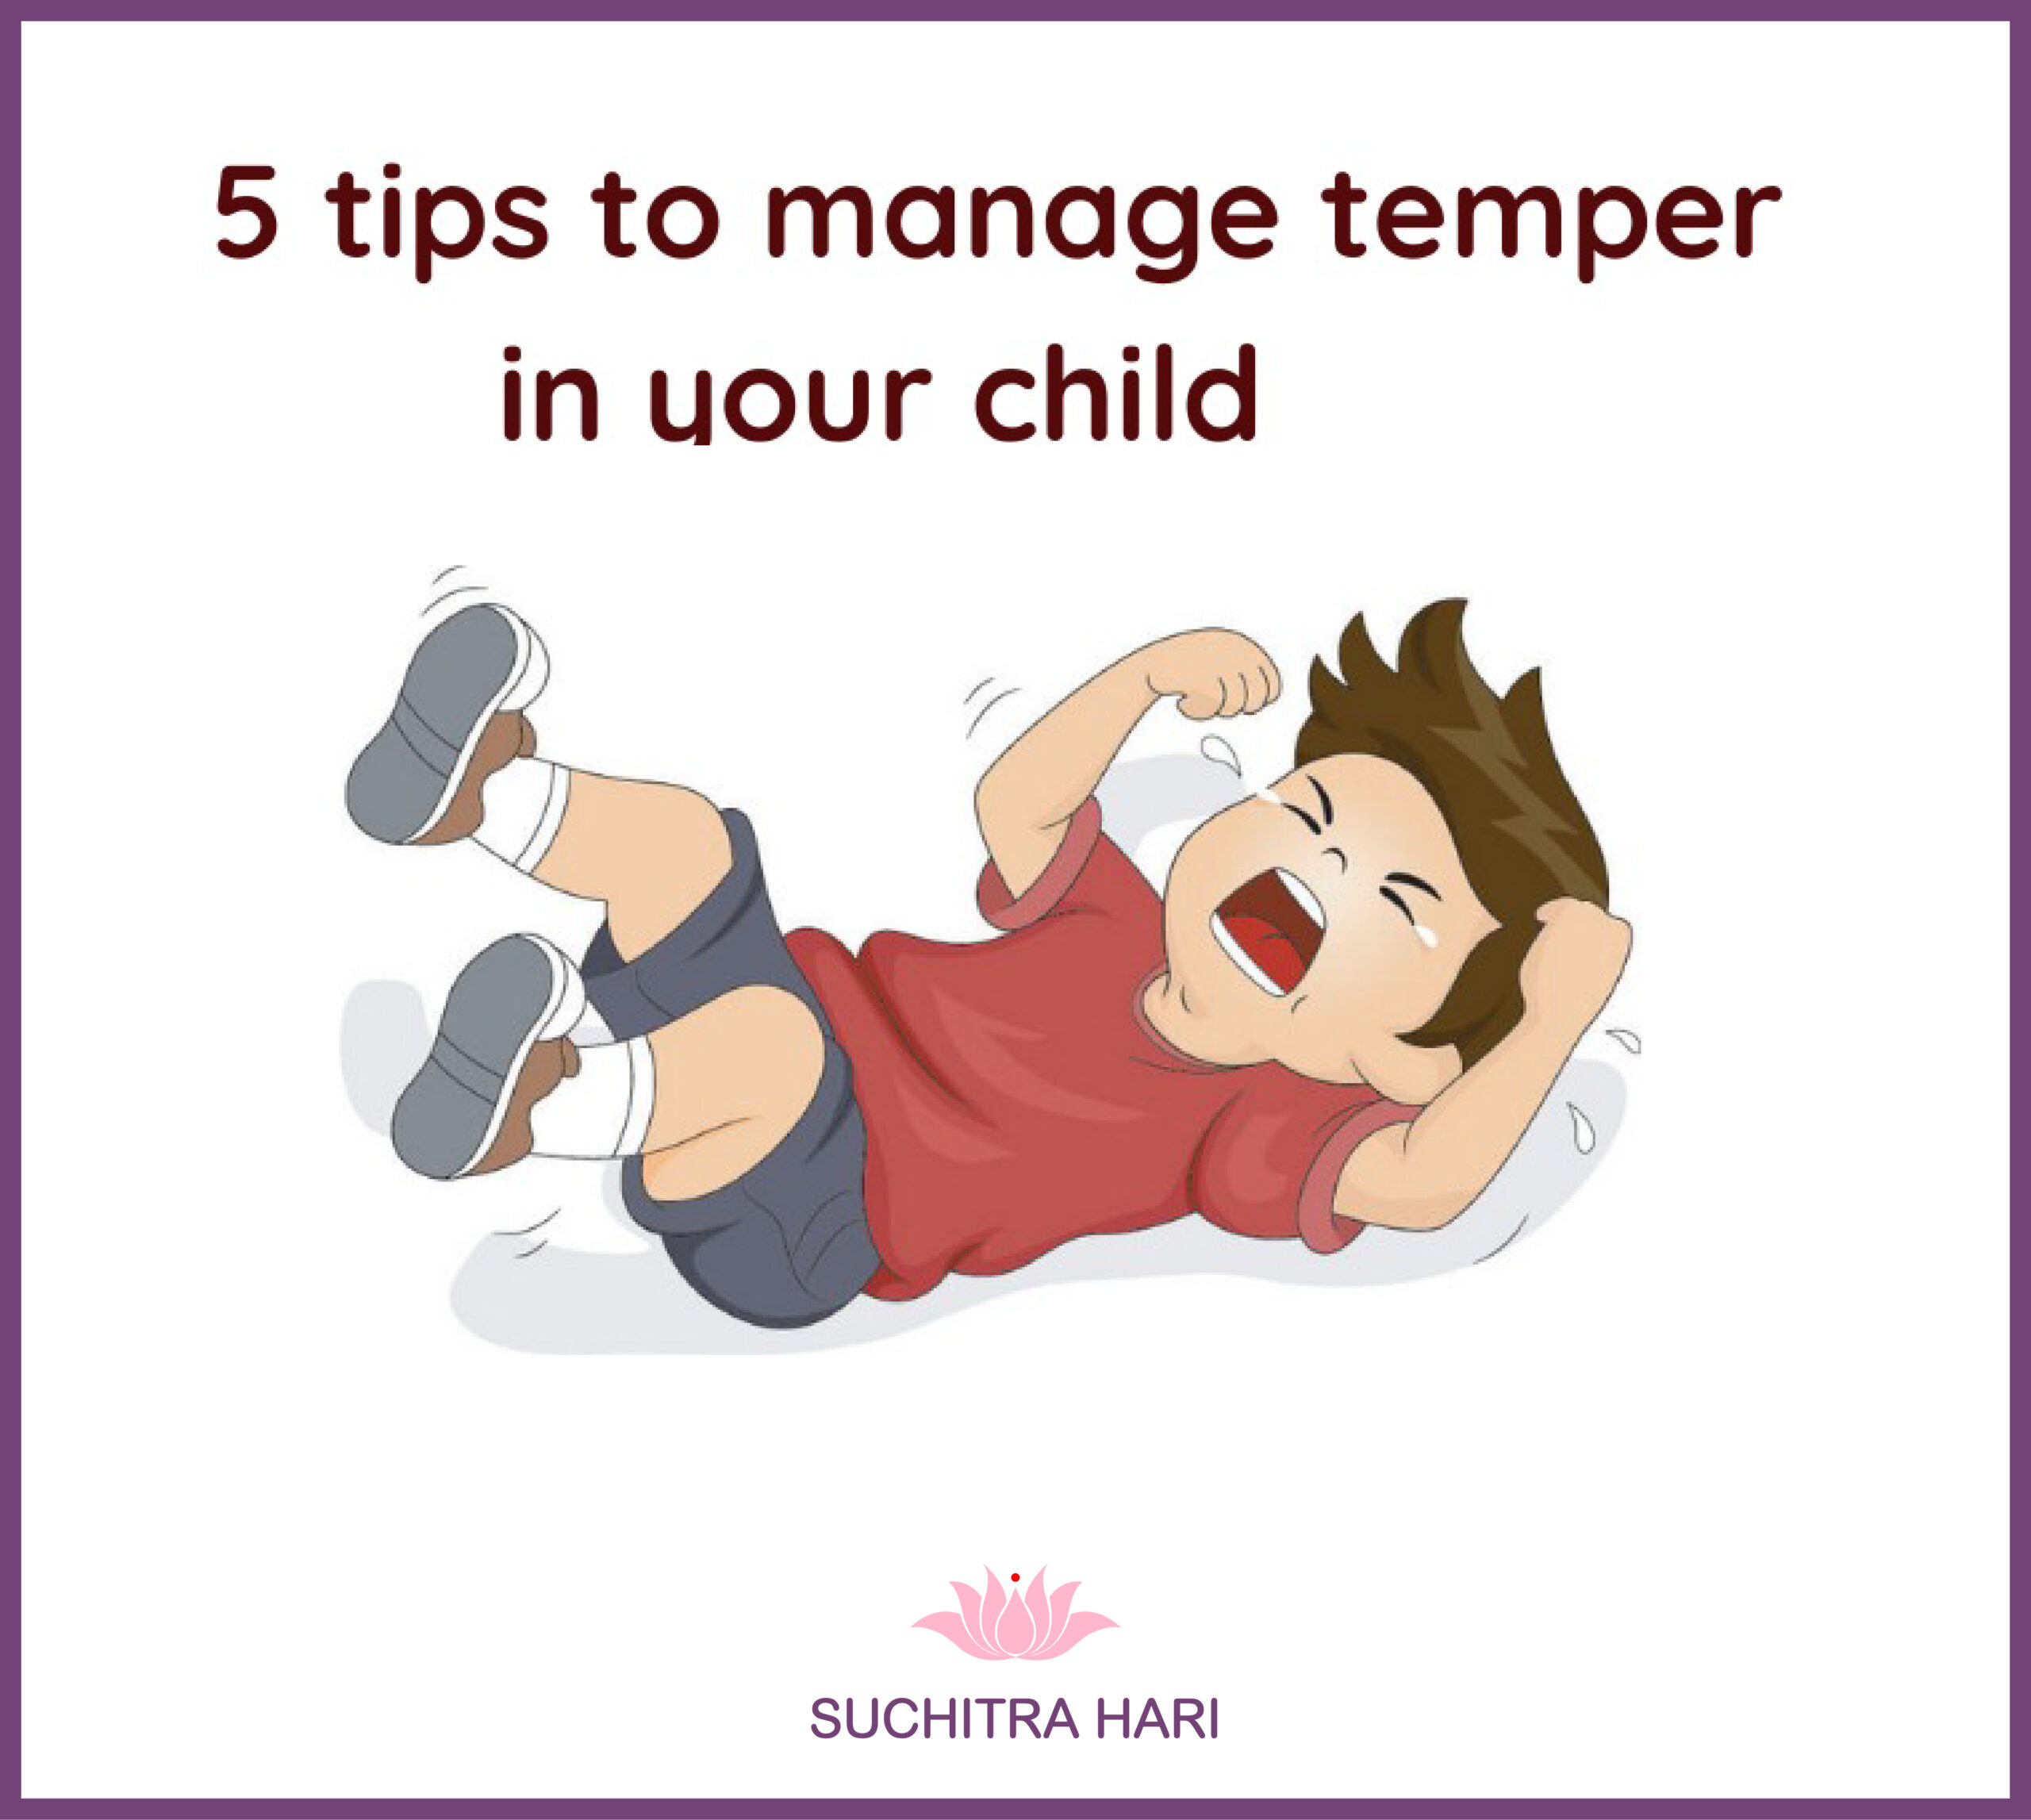 5 Tips to manage temper in your child